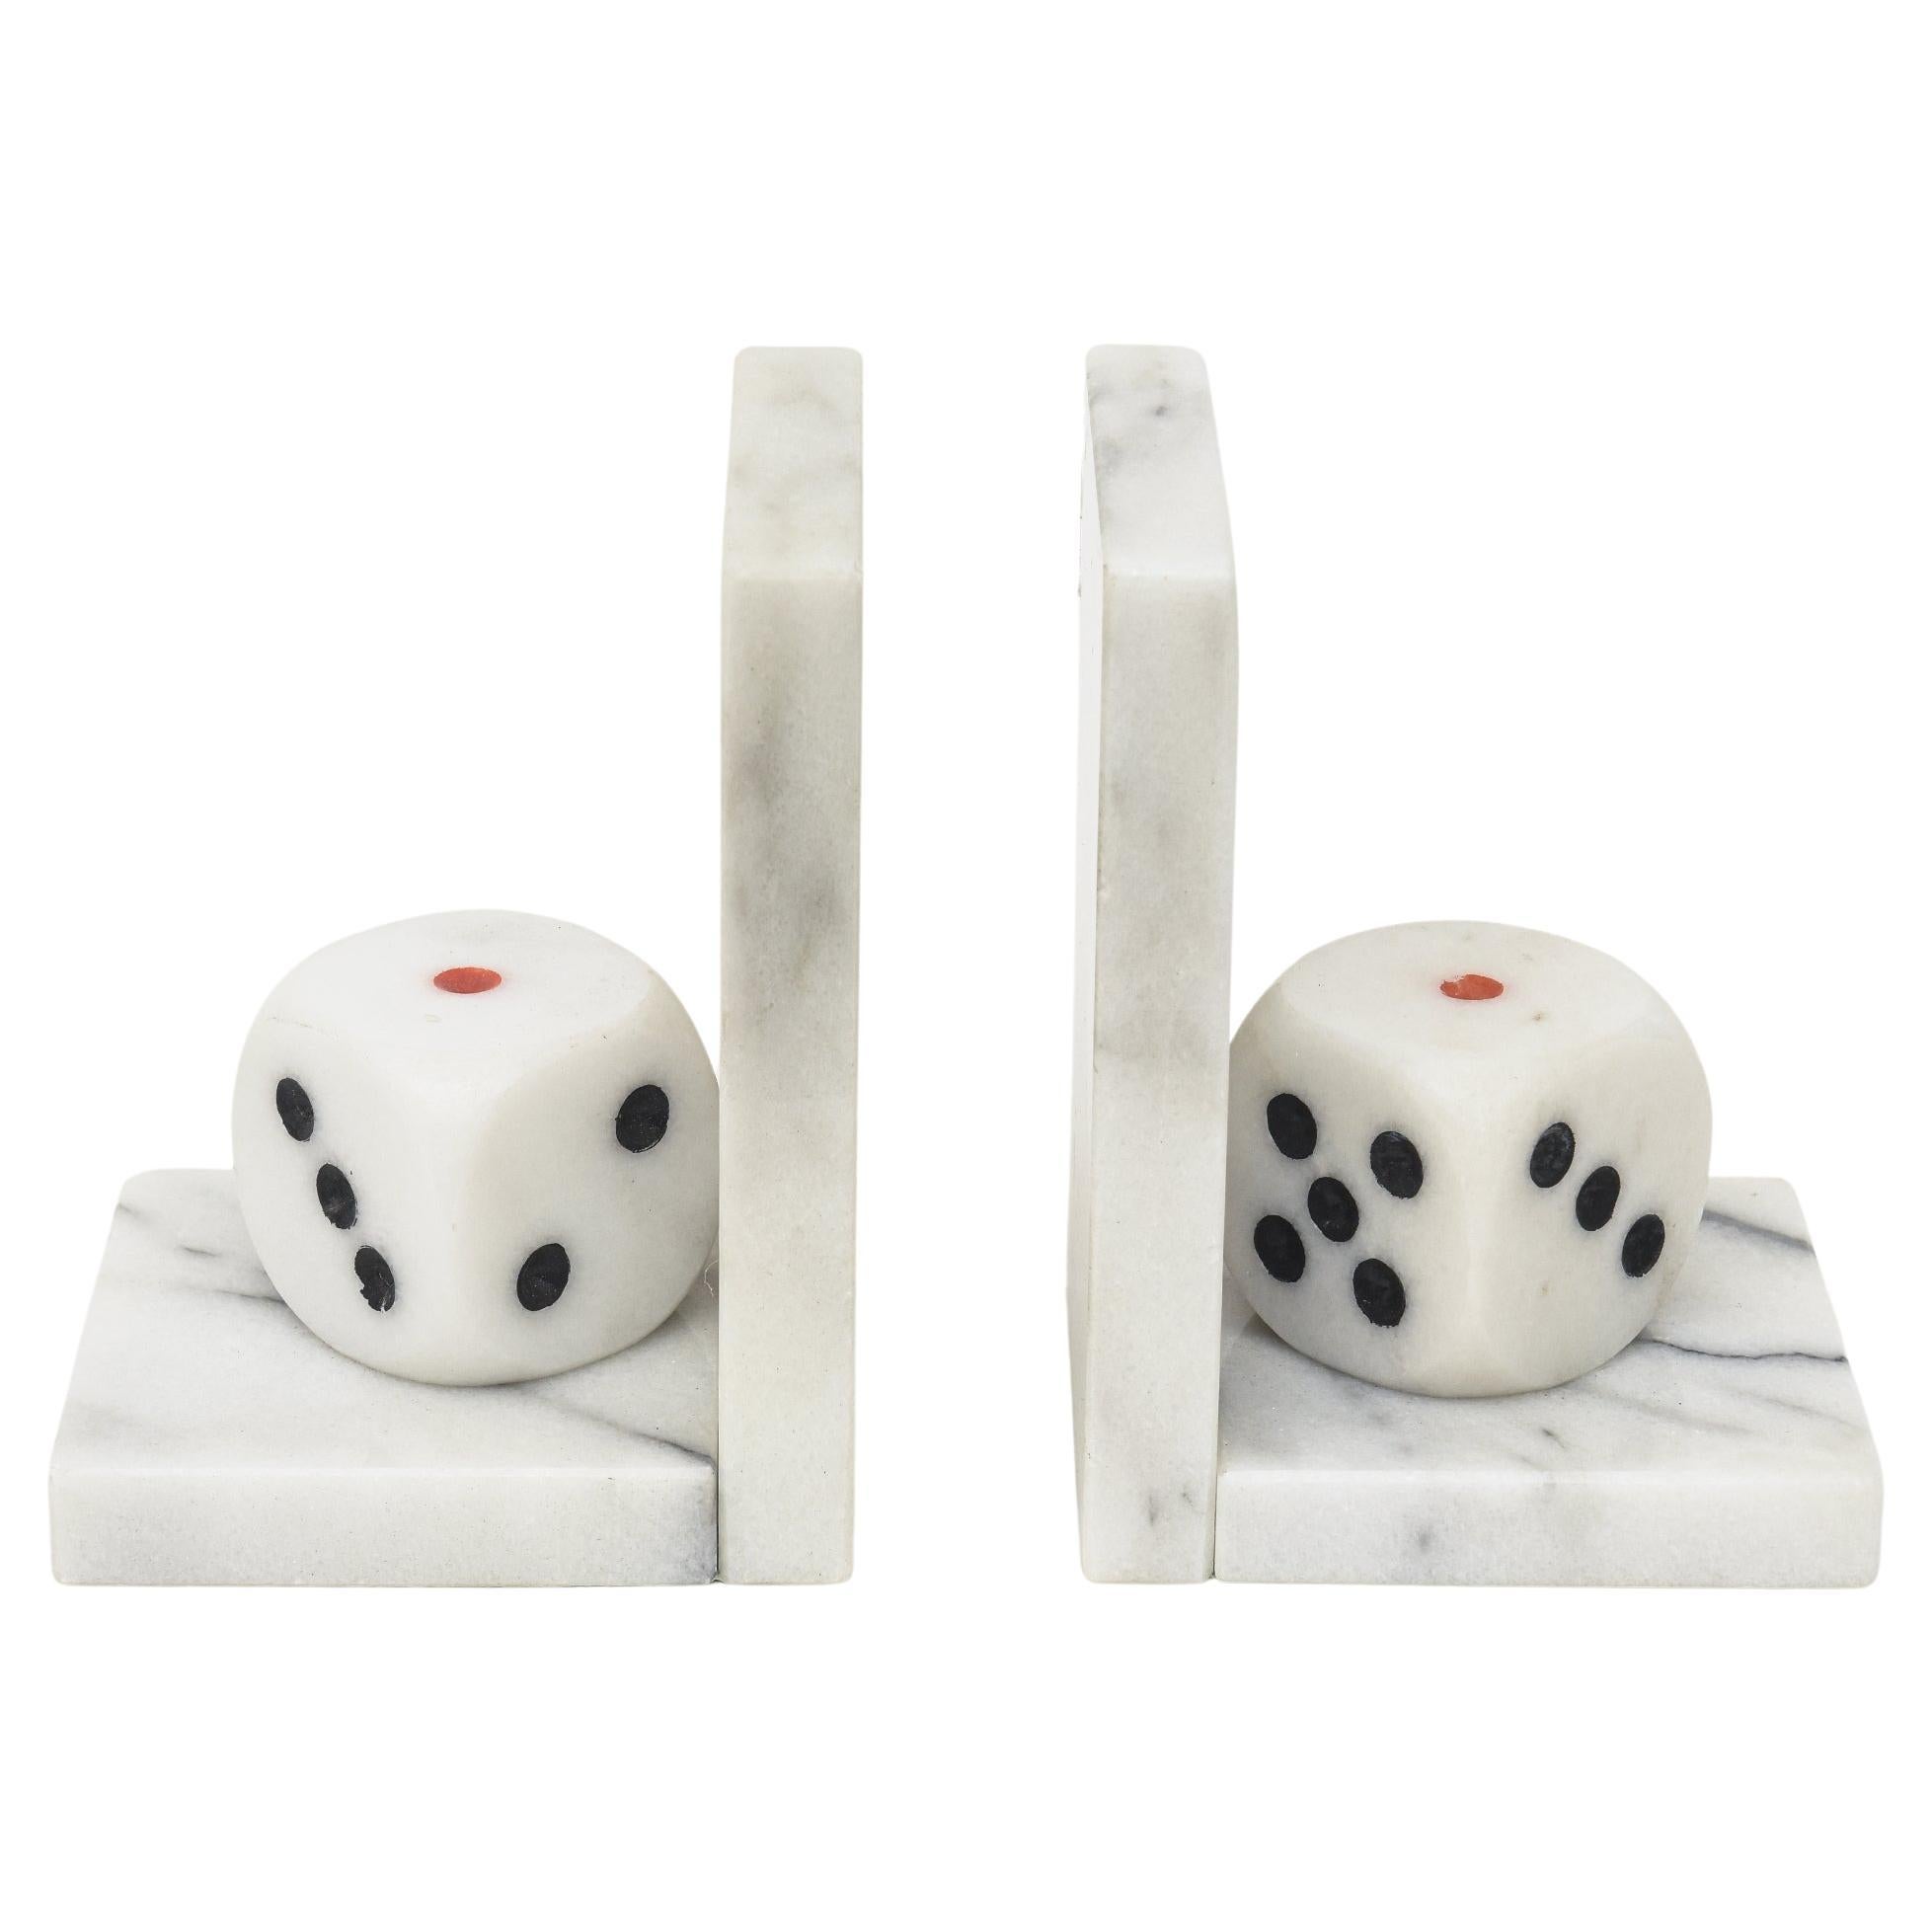 Vintage Italian White Carrara Marble, Red and Black Dice Bookends Pair Of